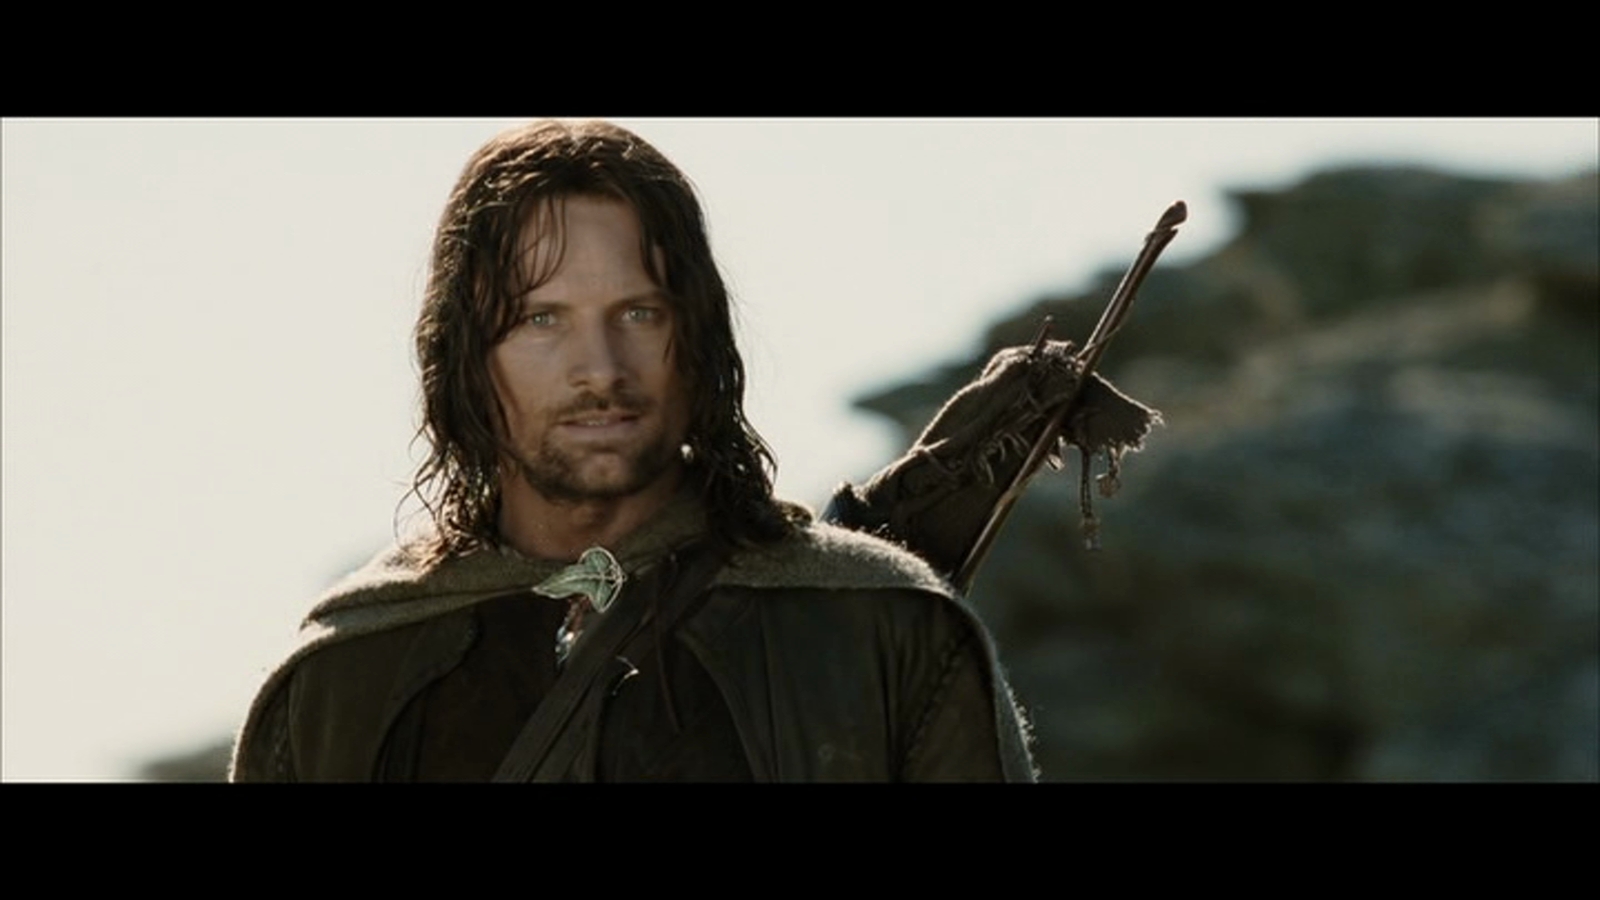 Aragorn Image HD Wallpaper And Background Photos